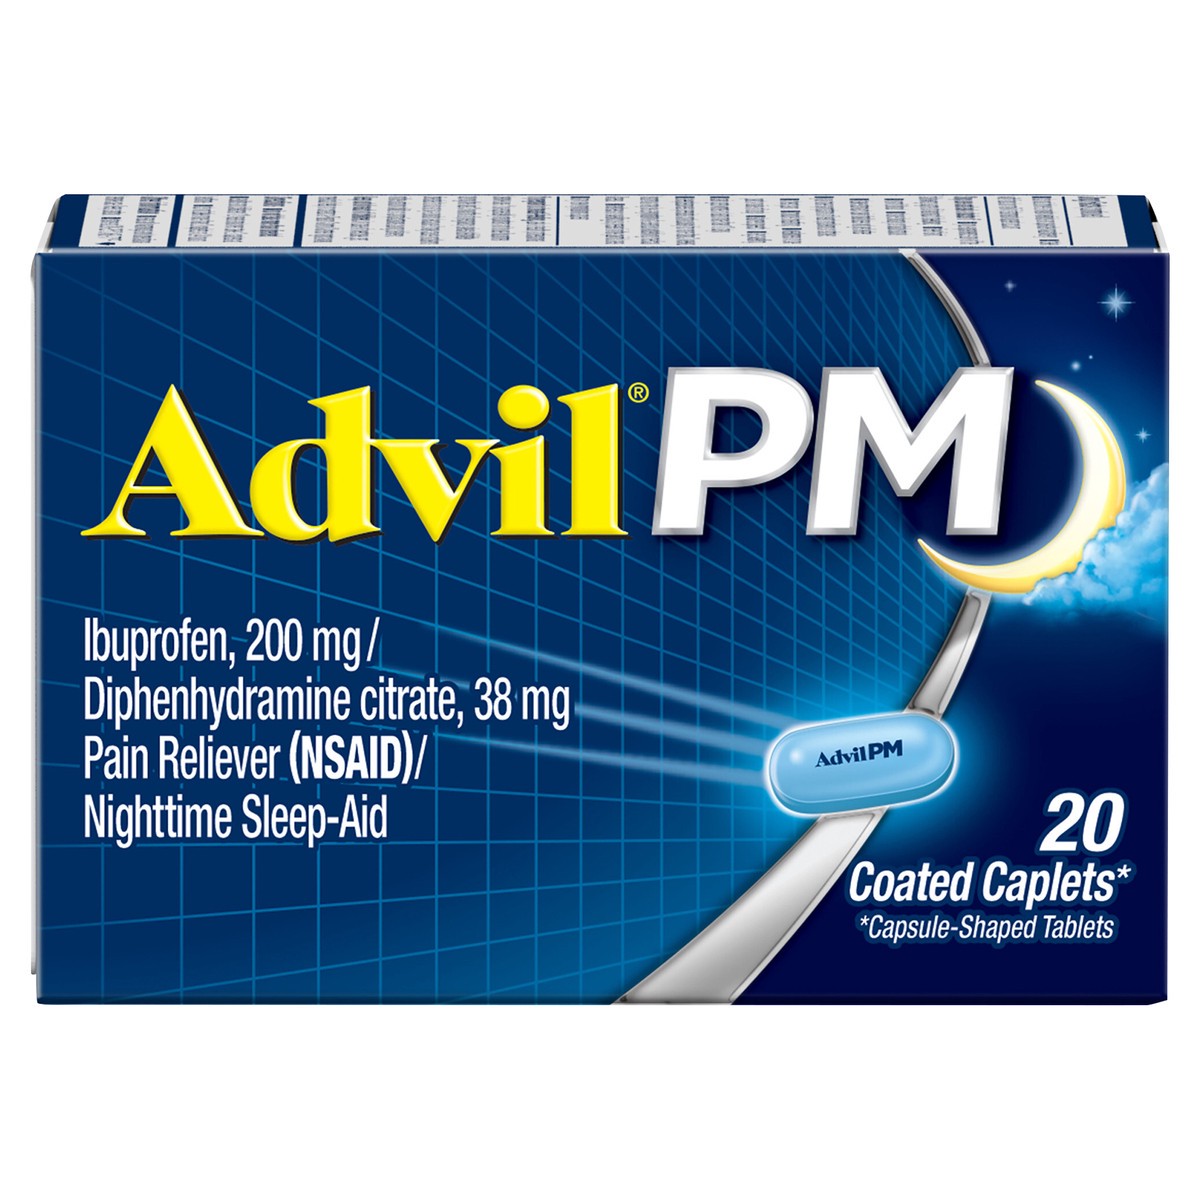 slide 1 of 1, Advil PM Pain Reliever and Nighttime Sleep Aid, Ibuprofen for Pain Relief and Diphenhydramine Citrate for a Sleep Aid - 20 Coated Caplets, 20 ct